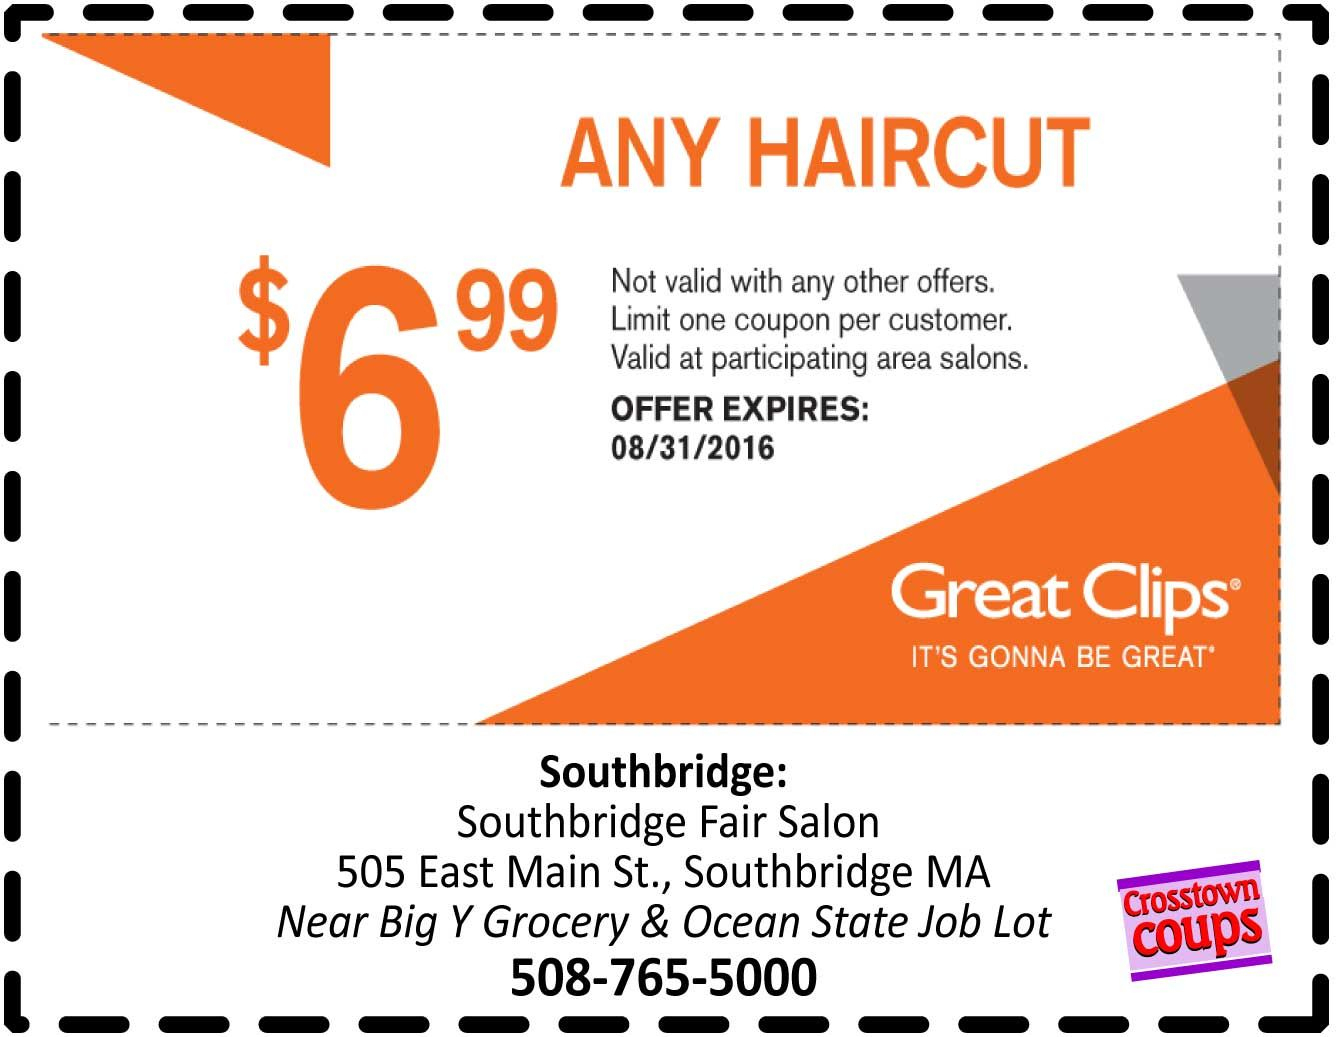 27 Great Clips Free Haircut Coupon | Hairstyles Ideas - Sports Clips Free Haircut Printable Coupon